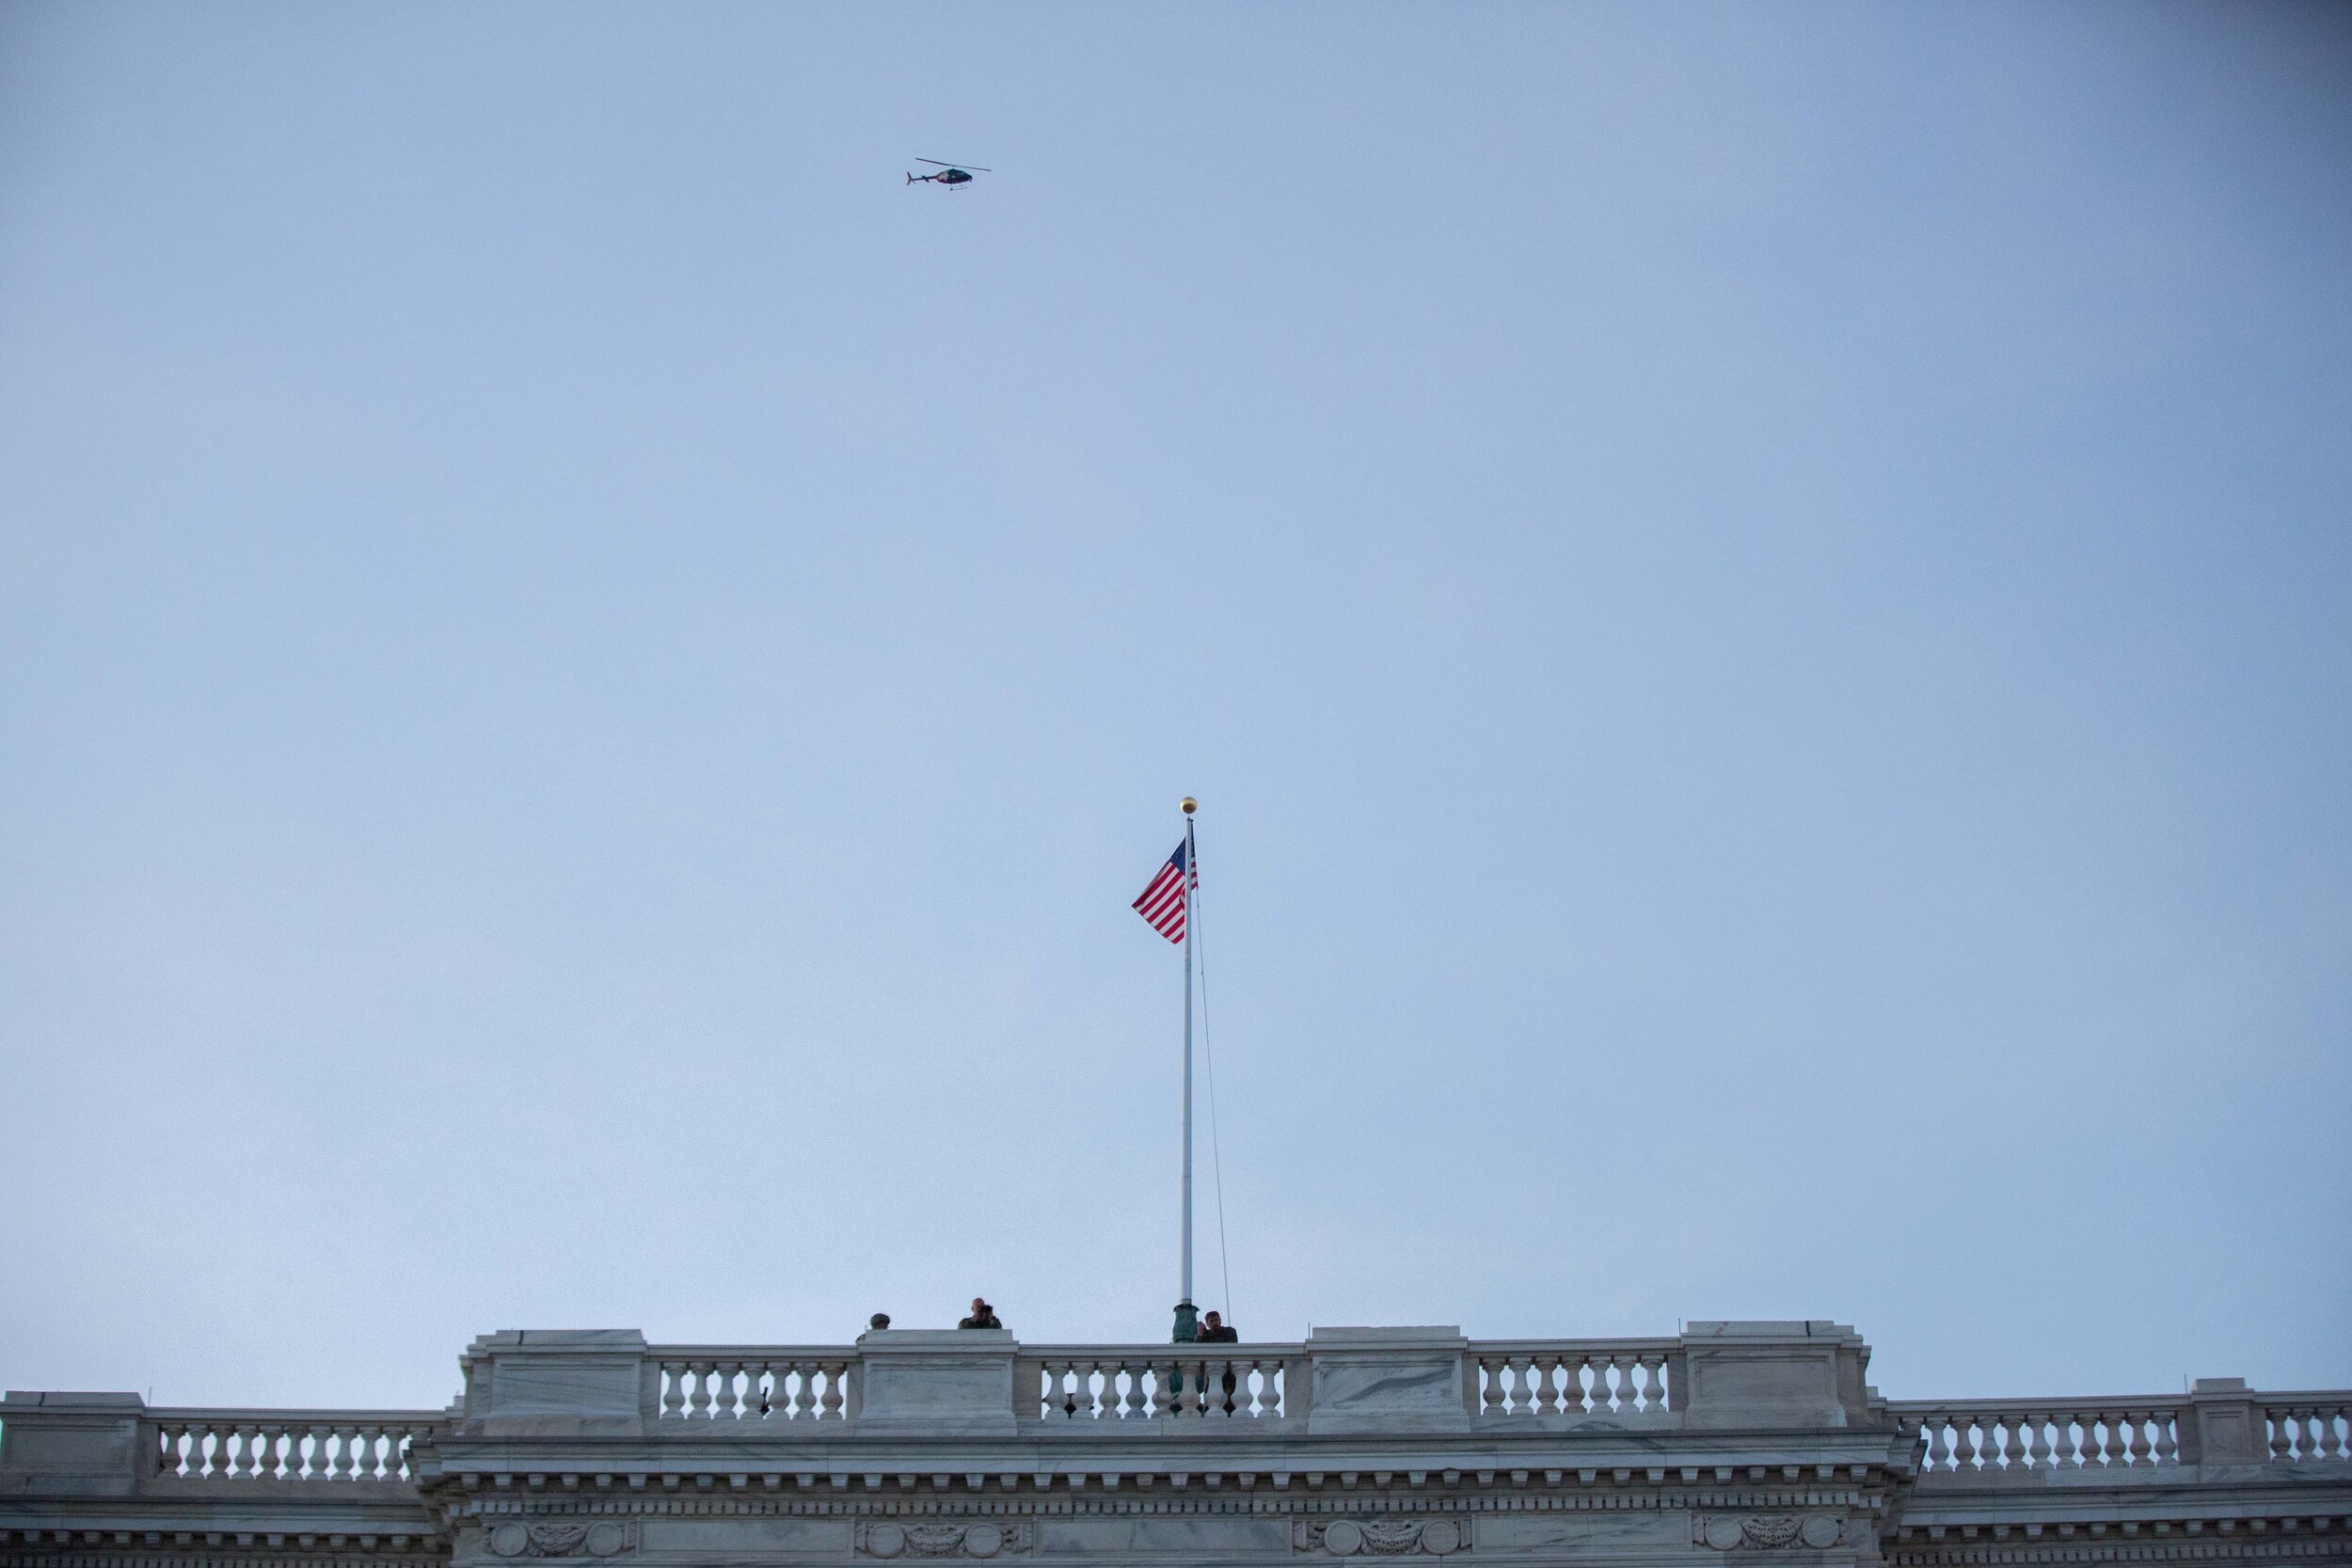  Men with binoculars watch from on top of the Minnesota State Capitol building in Saint Paul, Minnesota as a helicopter flies above them on June 1, 2020. Chris Juhn/Zenger 